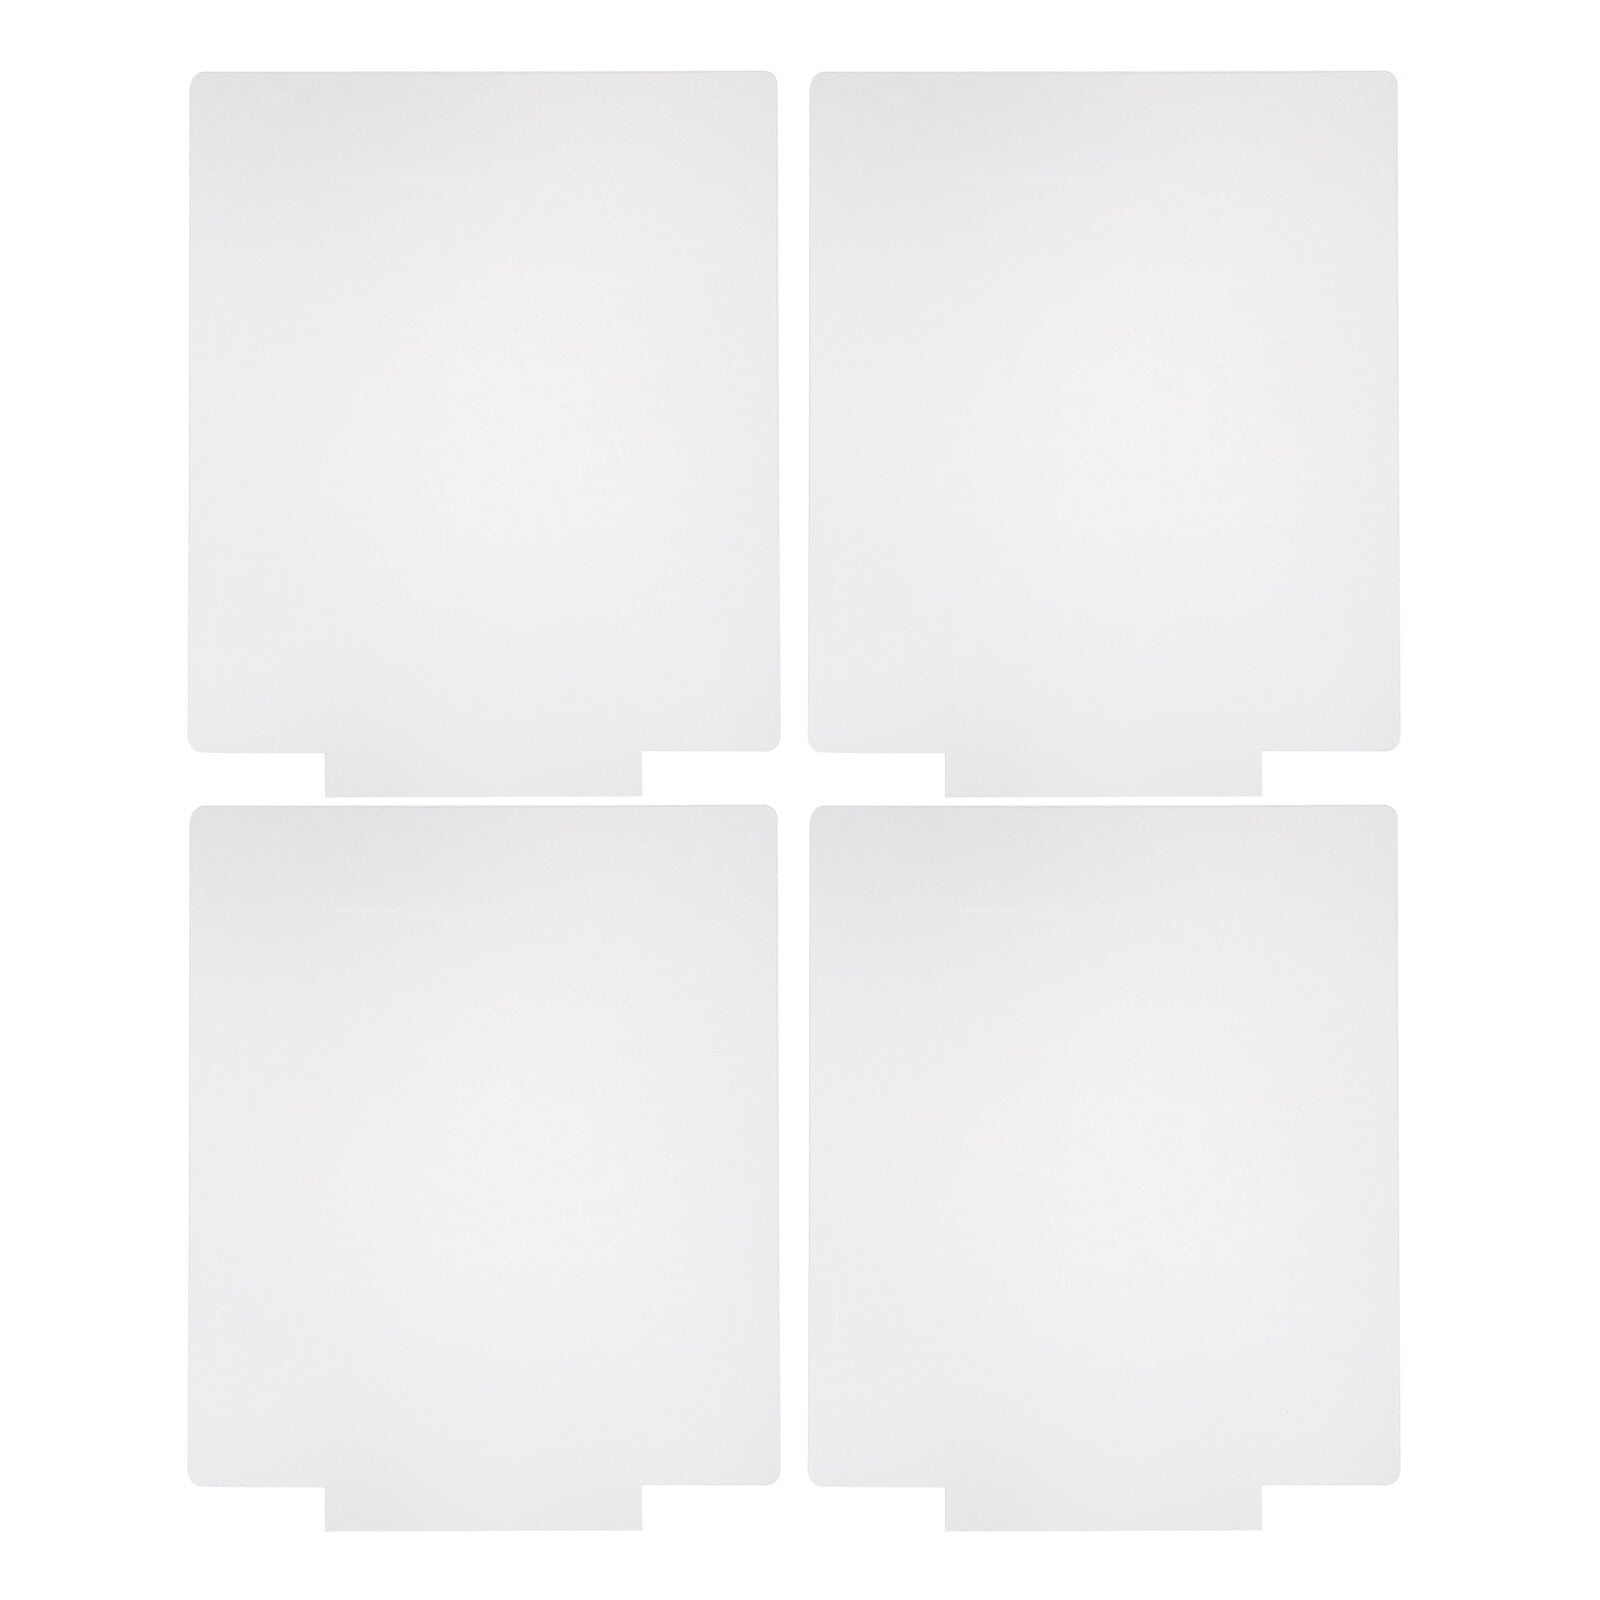 SimbaLux Acrylic Sheet Clear 4 x 6 Panel 0.08 Thick 2mm Plexiglass Board,  Easy to Cut, Pack of 5 